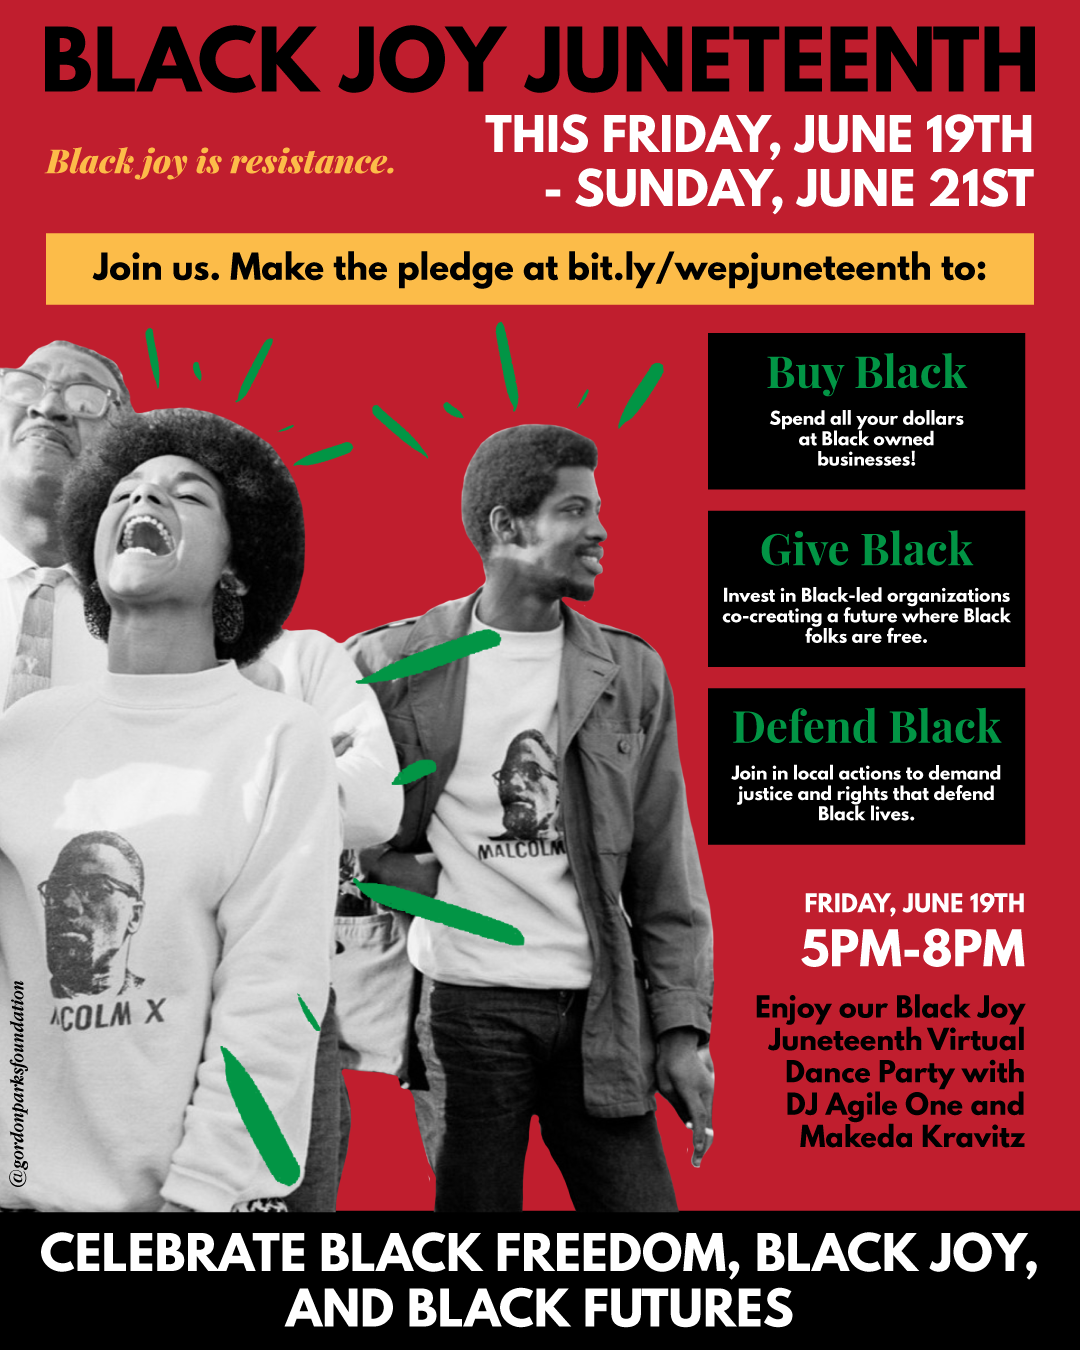 Poster that says: Black Joy Junteenth. This Friday, June 19th throguh Sunday, June 21st. Buy Black. Spend all of your dollars at Black owned businesses! Give Black. Invest in Black-led organizations co-creating a future where Black folks are free. Defends Black. Join in local actions to demand justice and rights that defend Black lives. Friday, June 19th, from 5 to 8 pm, enjoy our Black Joy Juneteenth virtual dance party with DJ Agirl One and Makeda Kravtiz. Black joy is resistance.